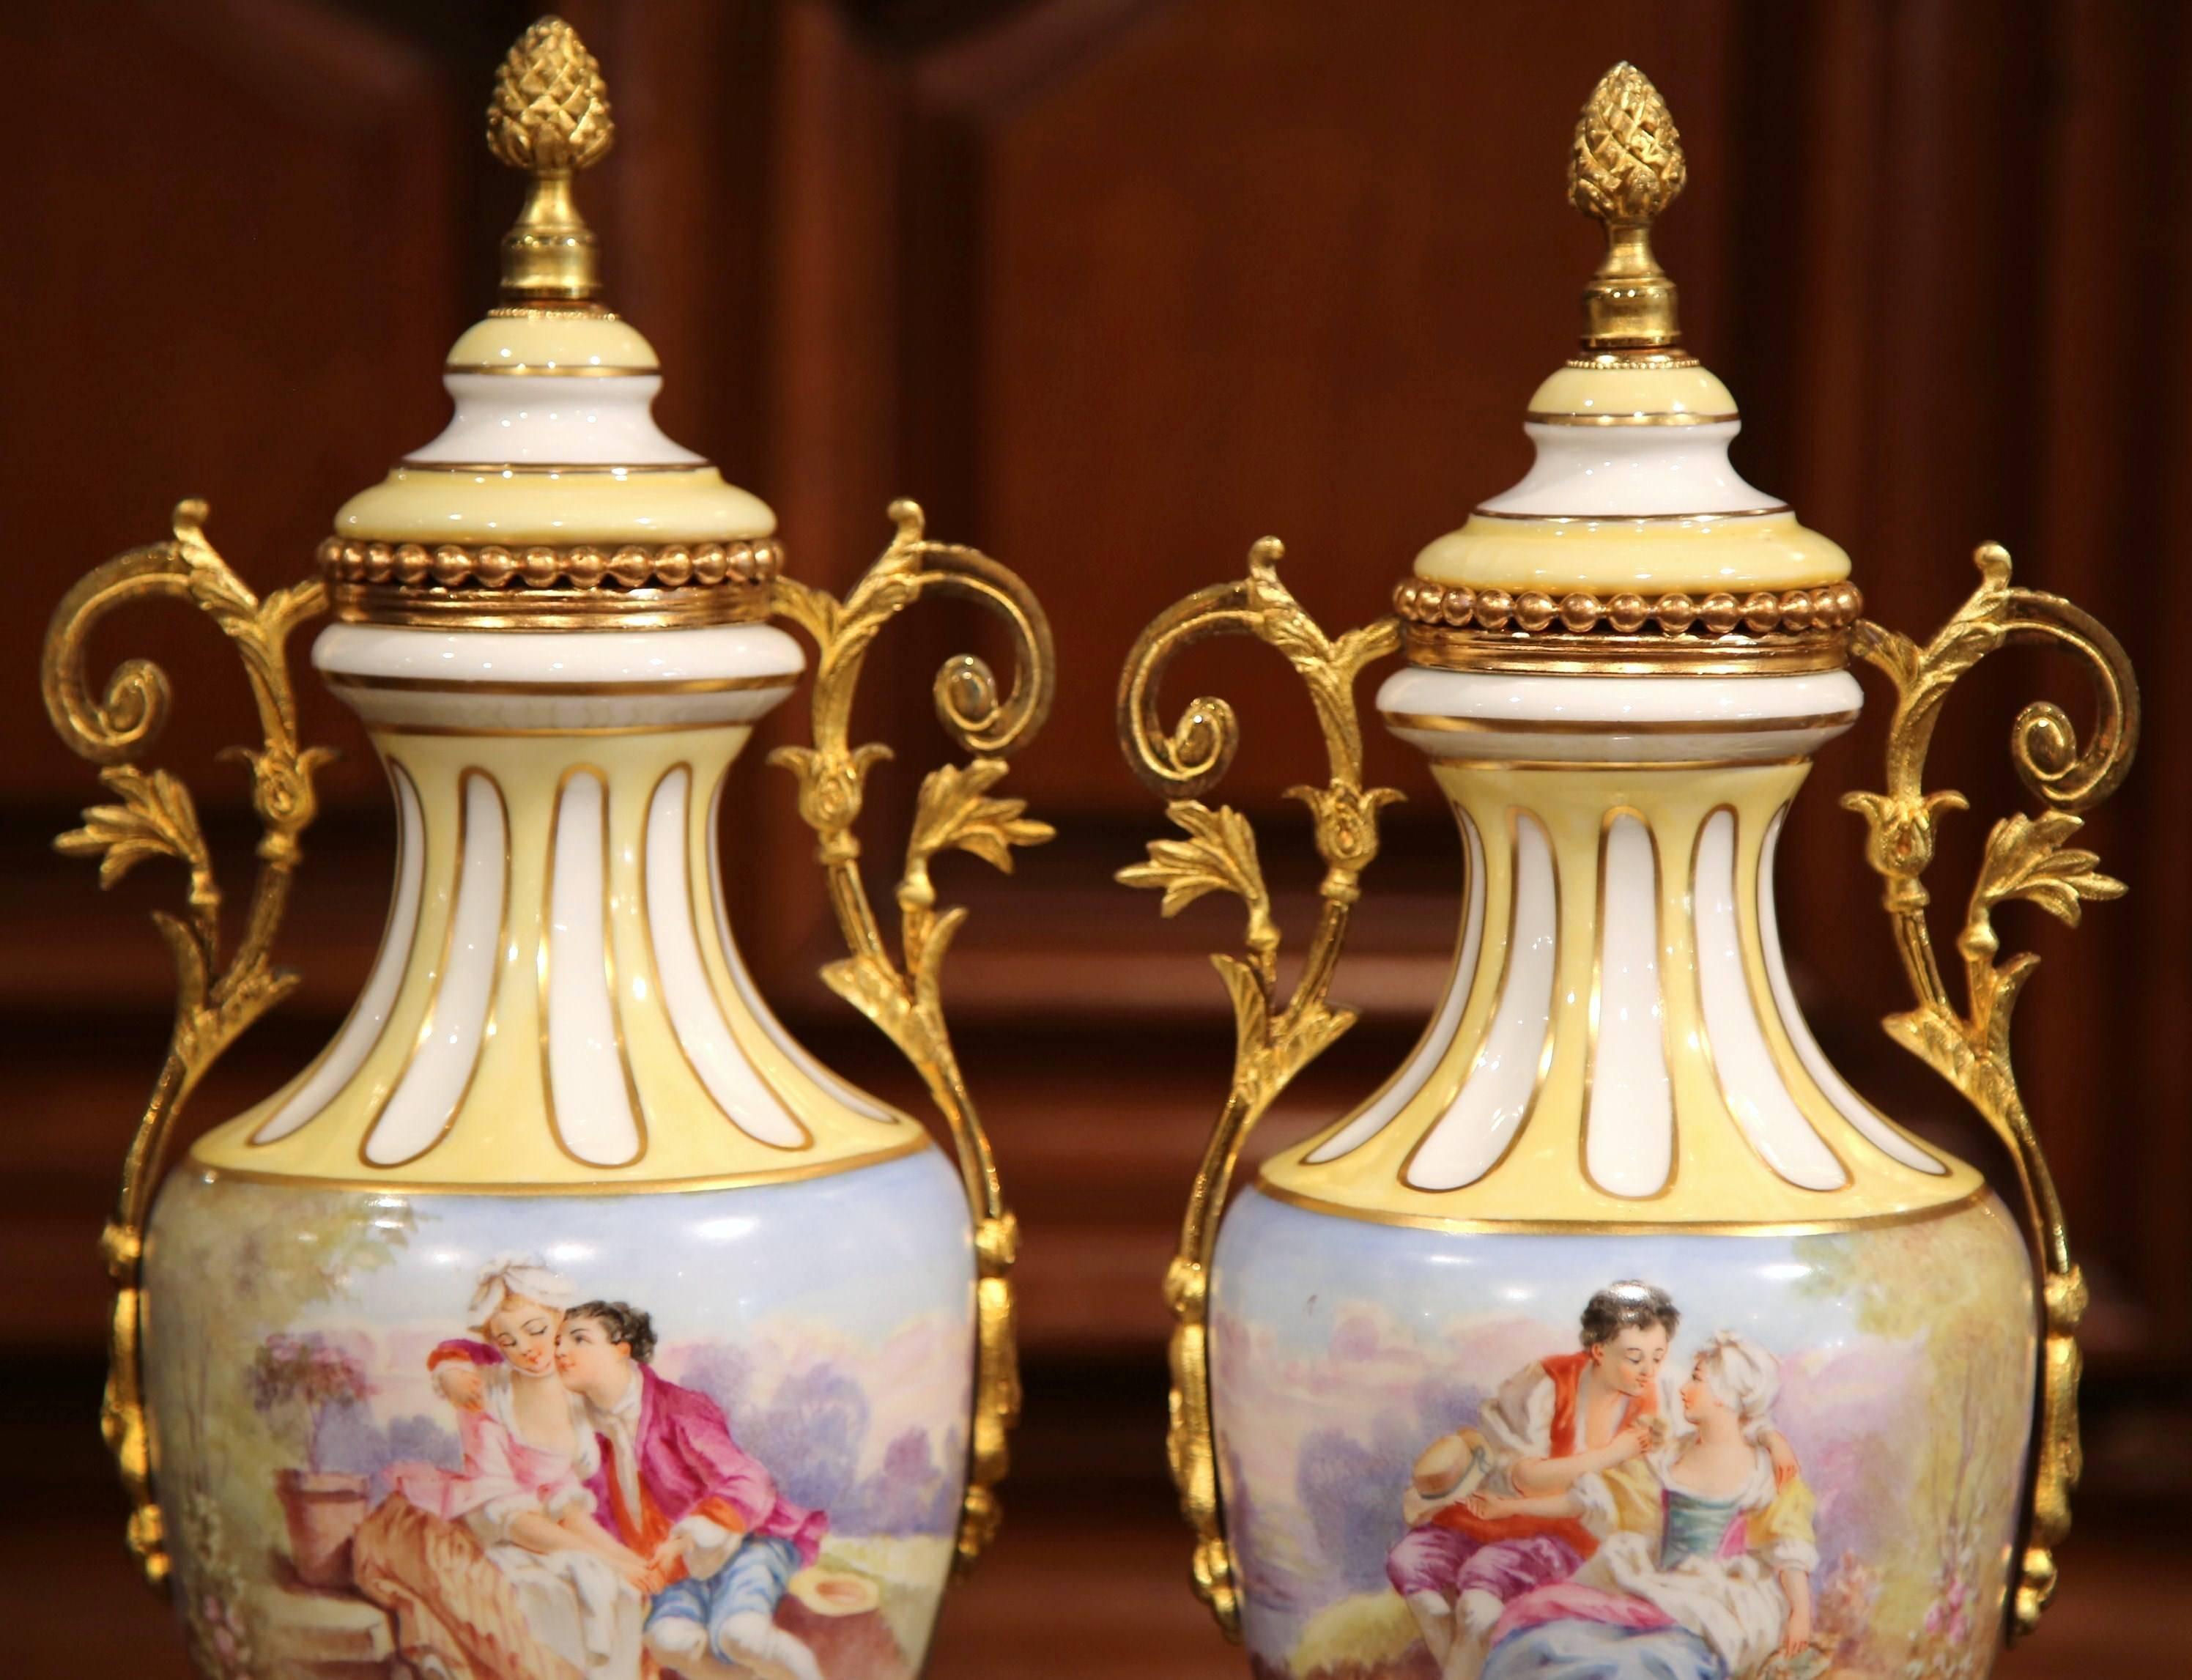 Pair of 19th Century French Painted Porcelain and Bronze Vases Signed Maxant 1